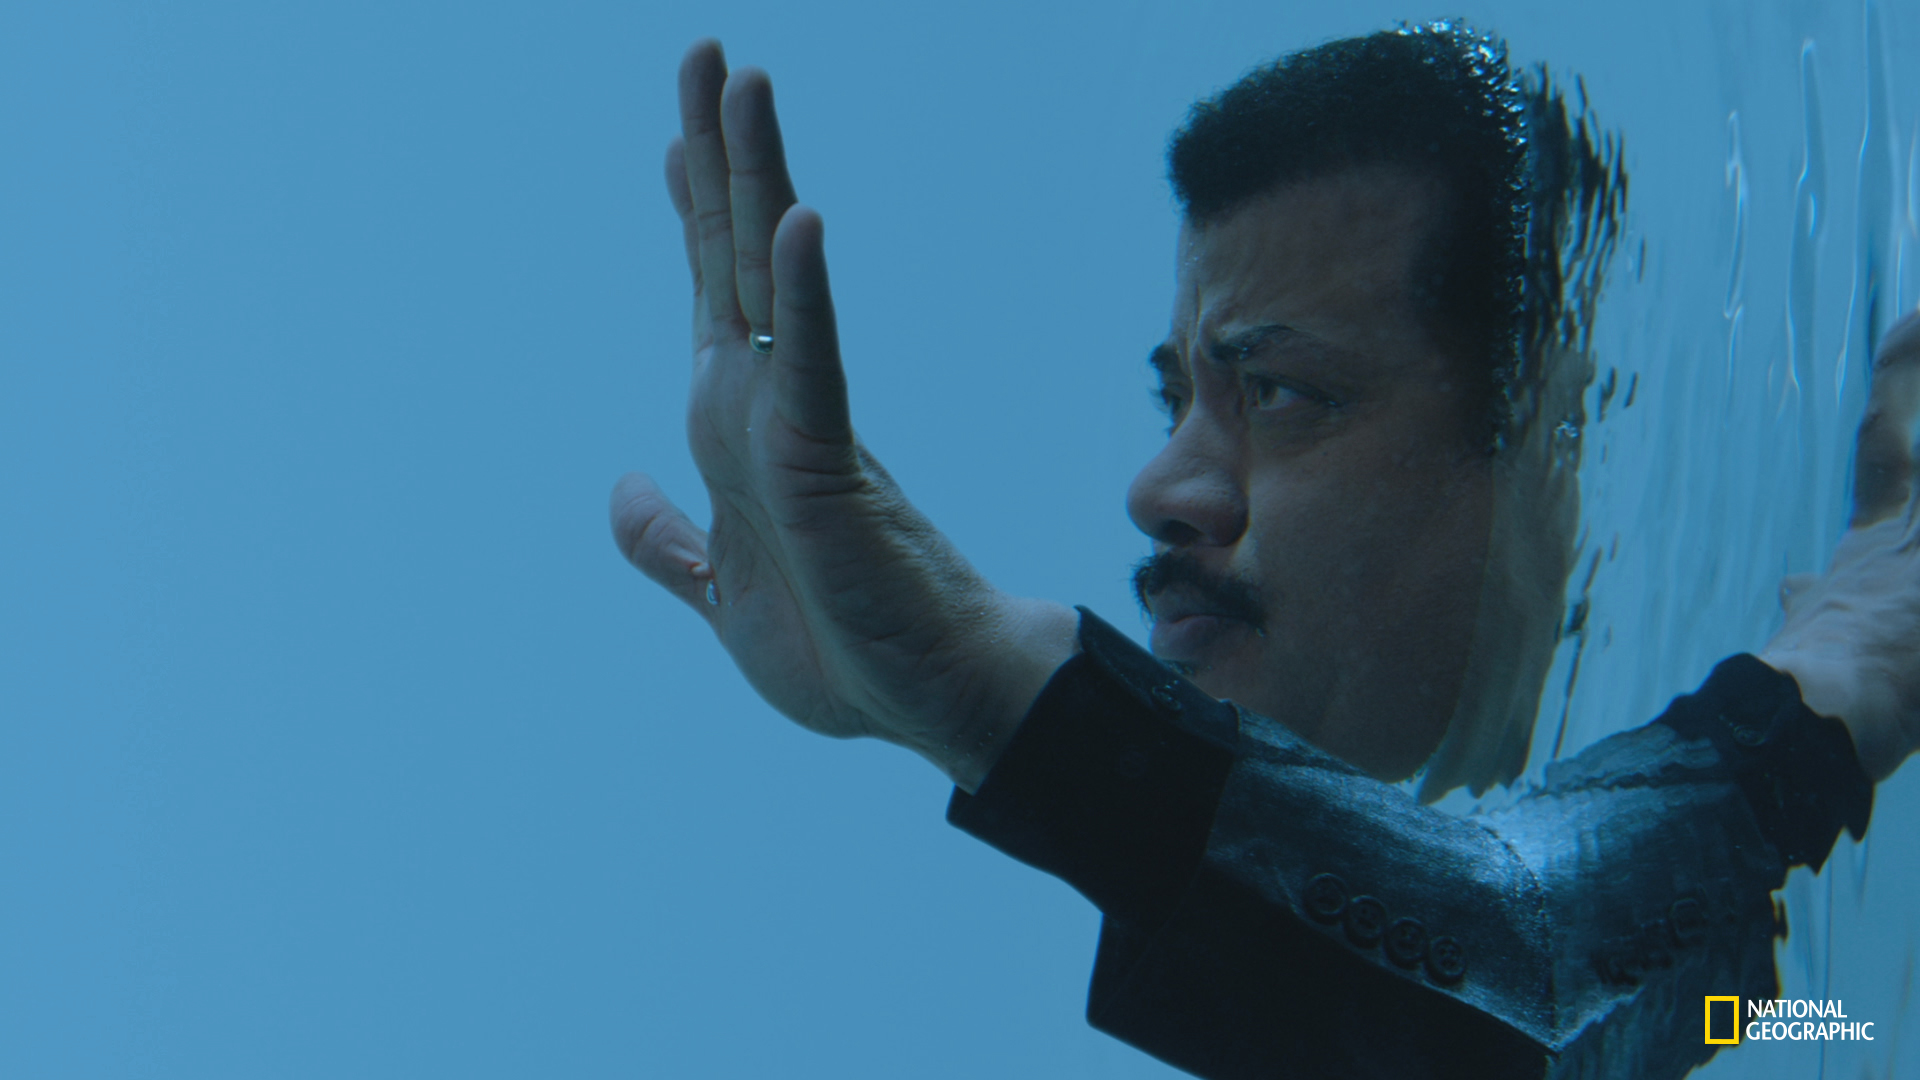 Host Neil deGrasse Tyson enters the Palace of Life, an imaginary place of ancient towers hidden by the mists of time and enshrouded in myth. Here, he moves into its largest, most ancient realm, to walk among the life at the bottom of the sea. COSMOS: POSSIBLE WORLDS premieres March 9, 2020 on National Geographic. (National Geographic/Cosmos Studios)